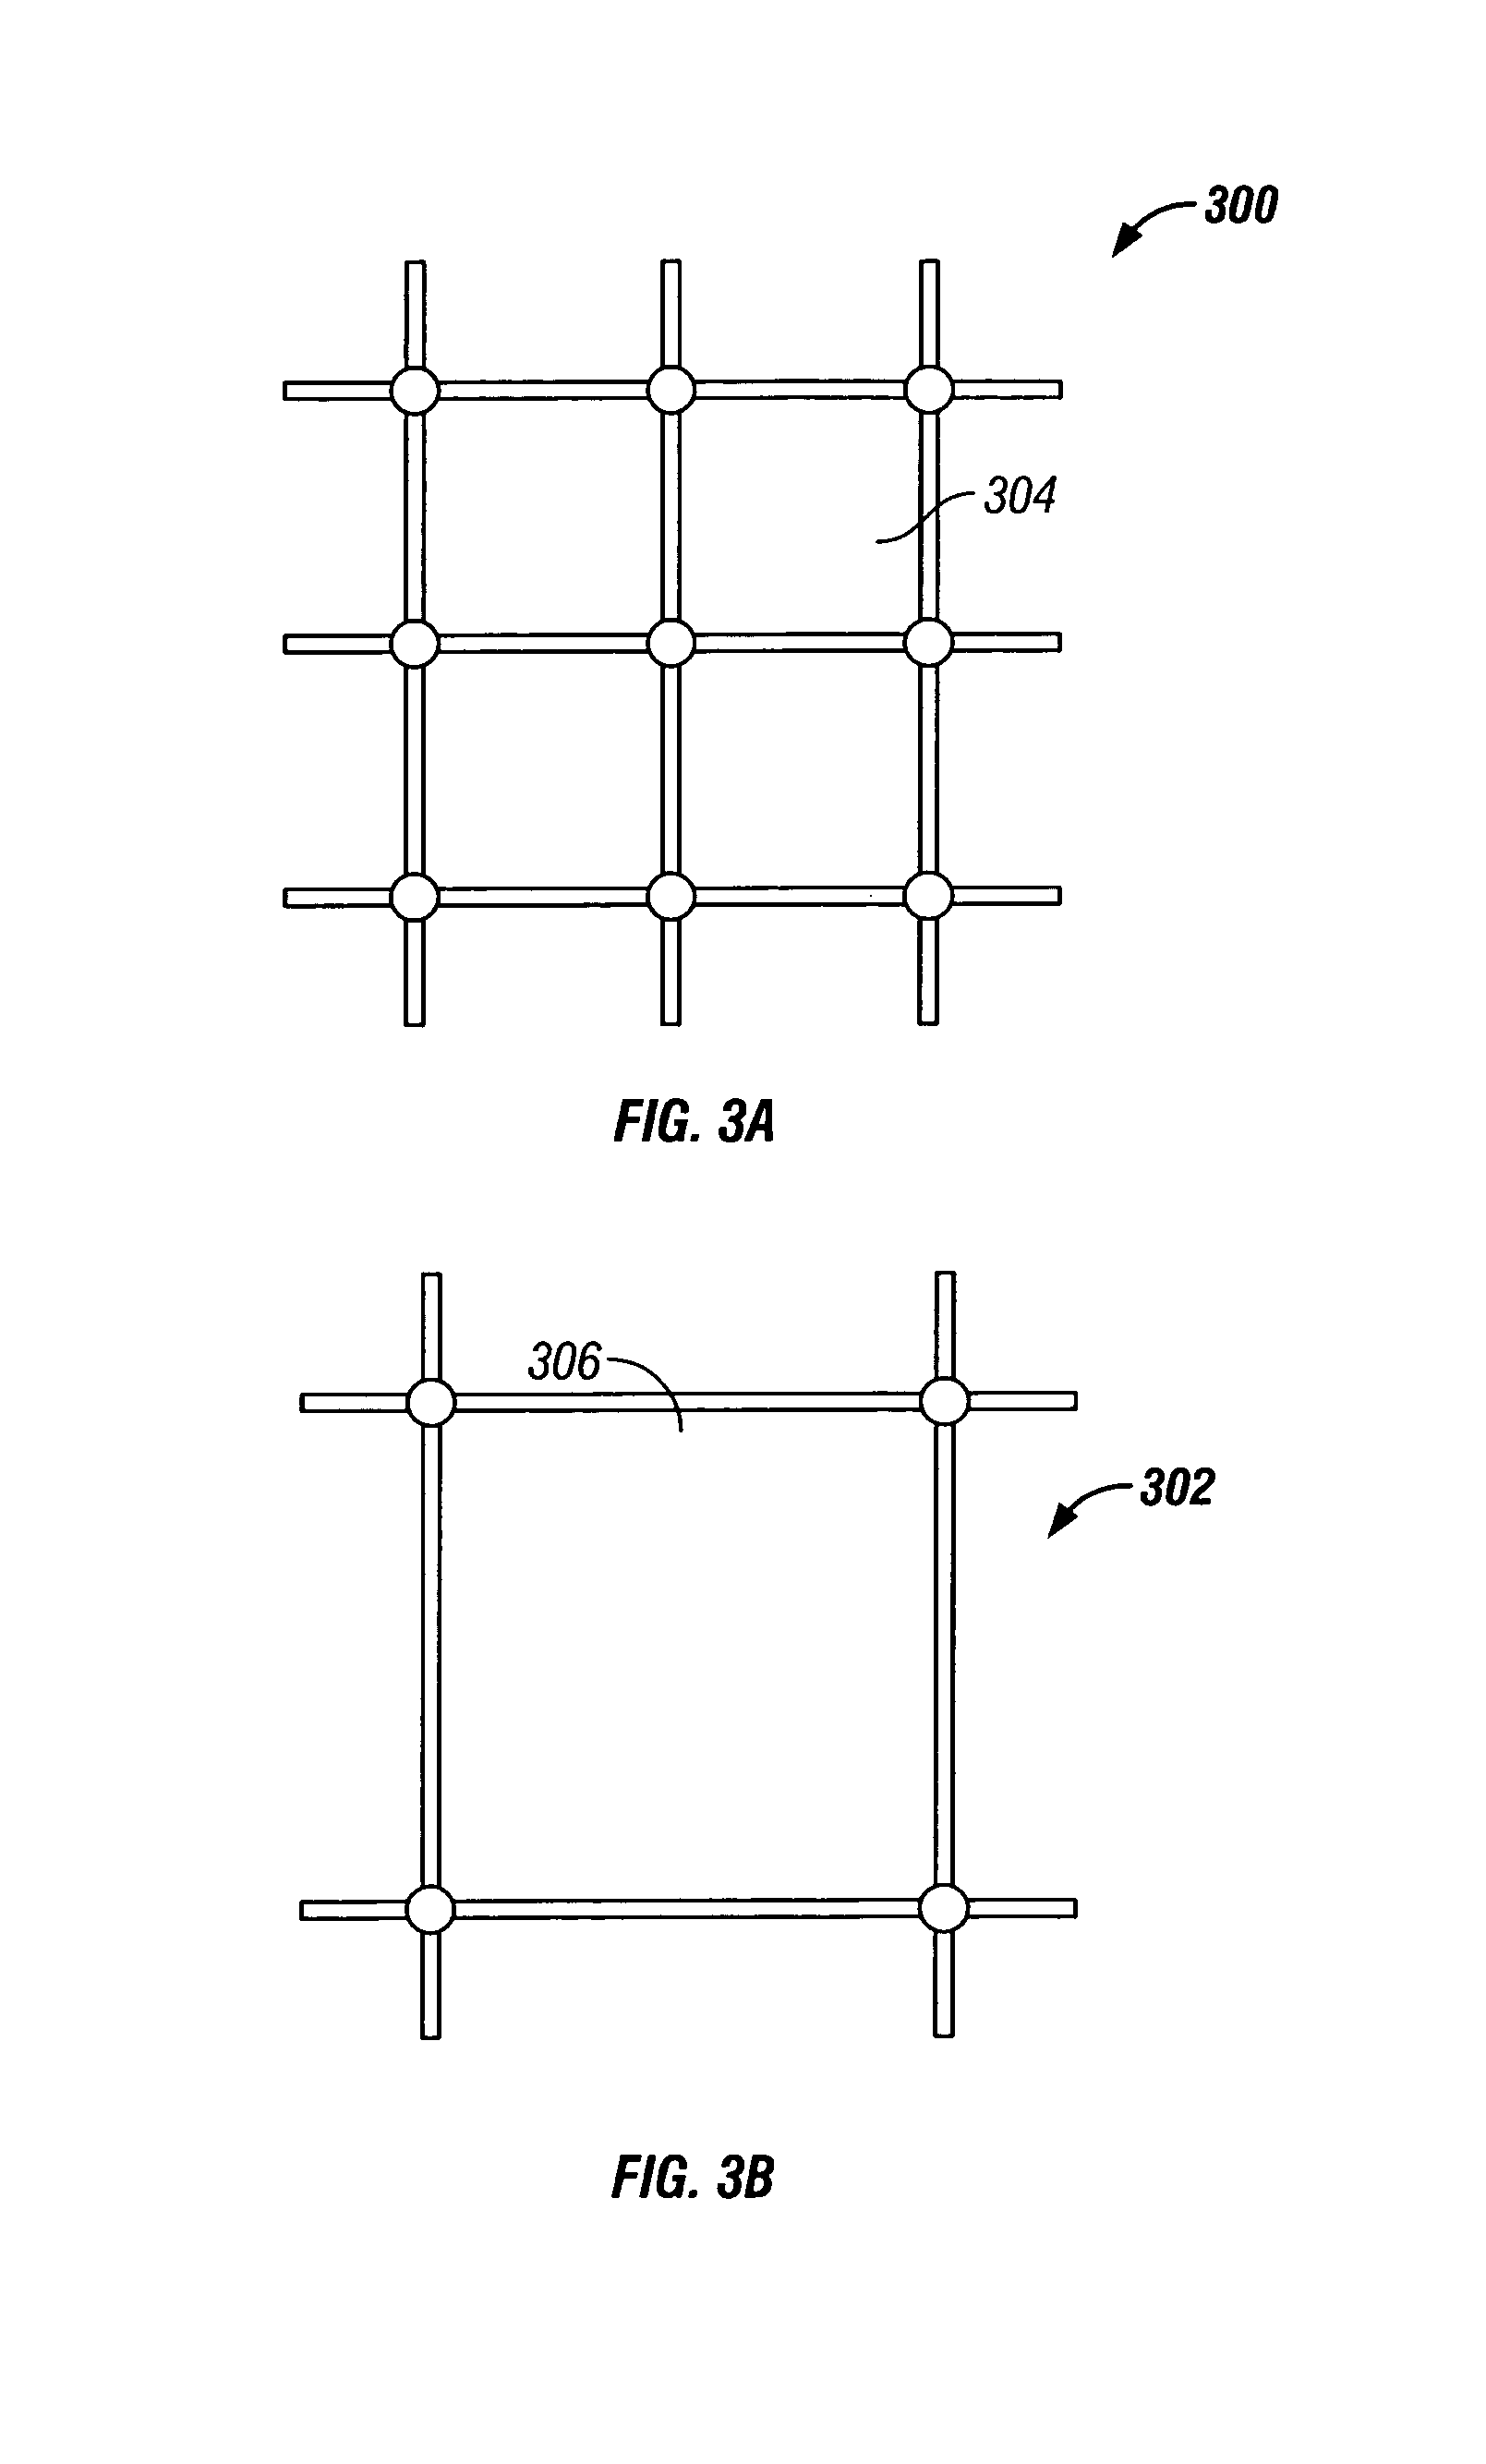 Double network reticulated frame structure